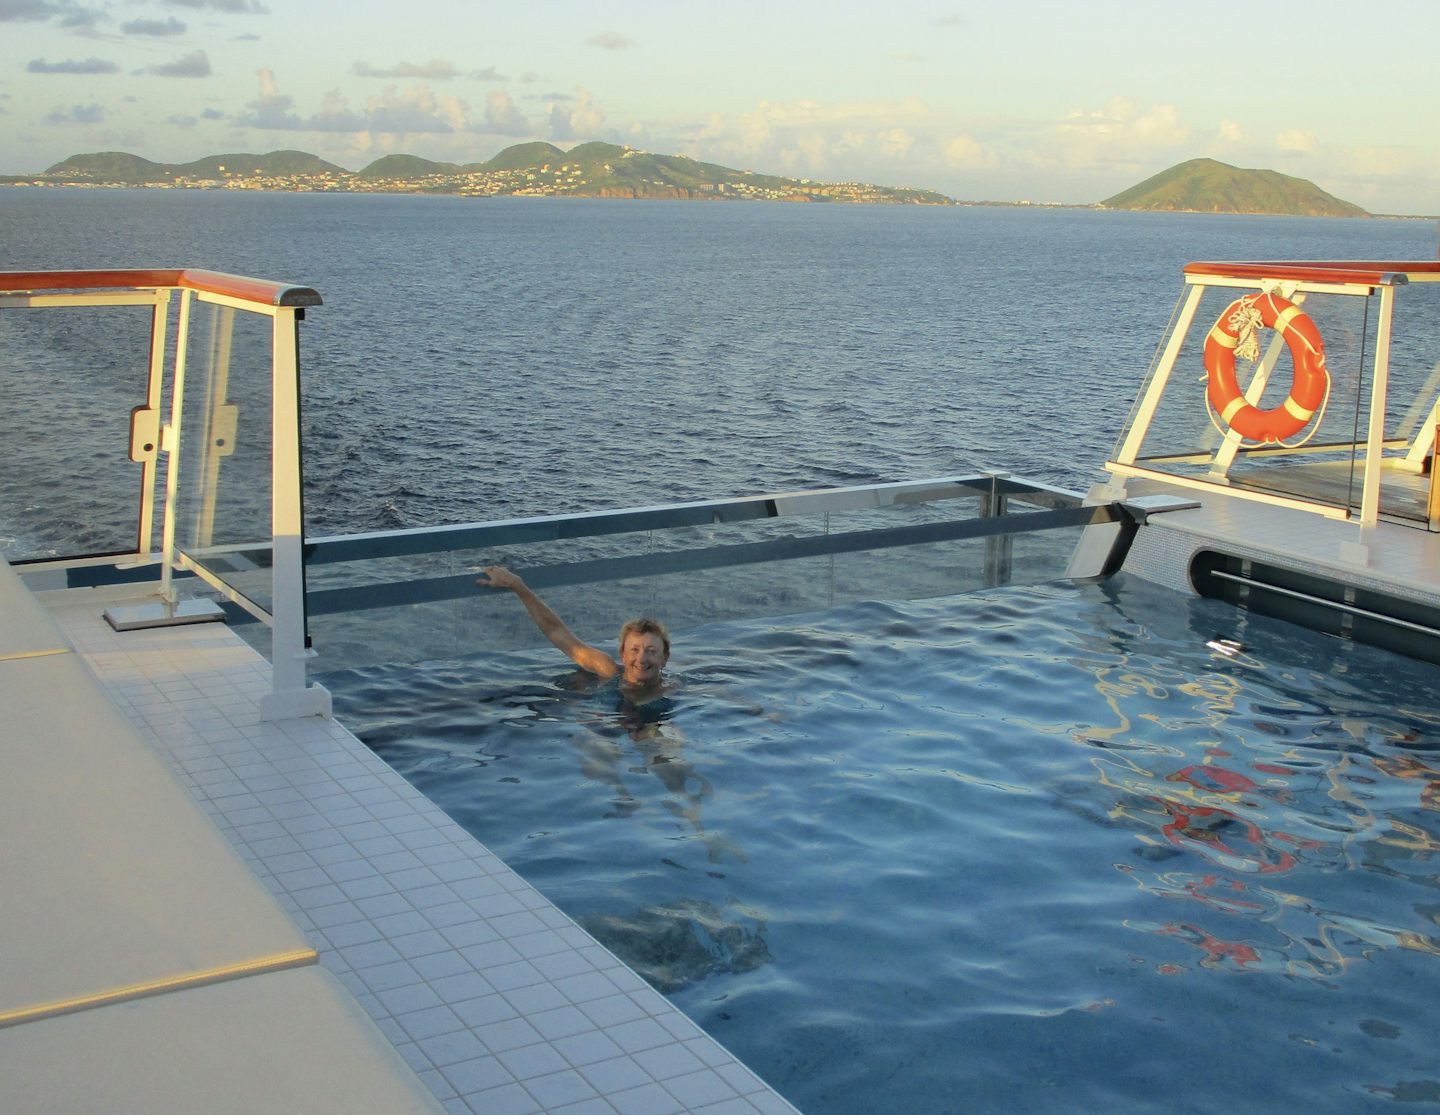 Infinity pool at the back of the ship. Very cool!